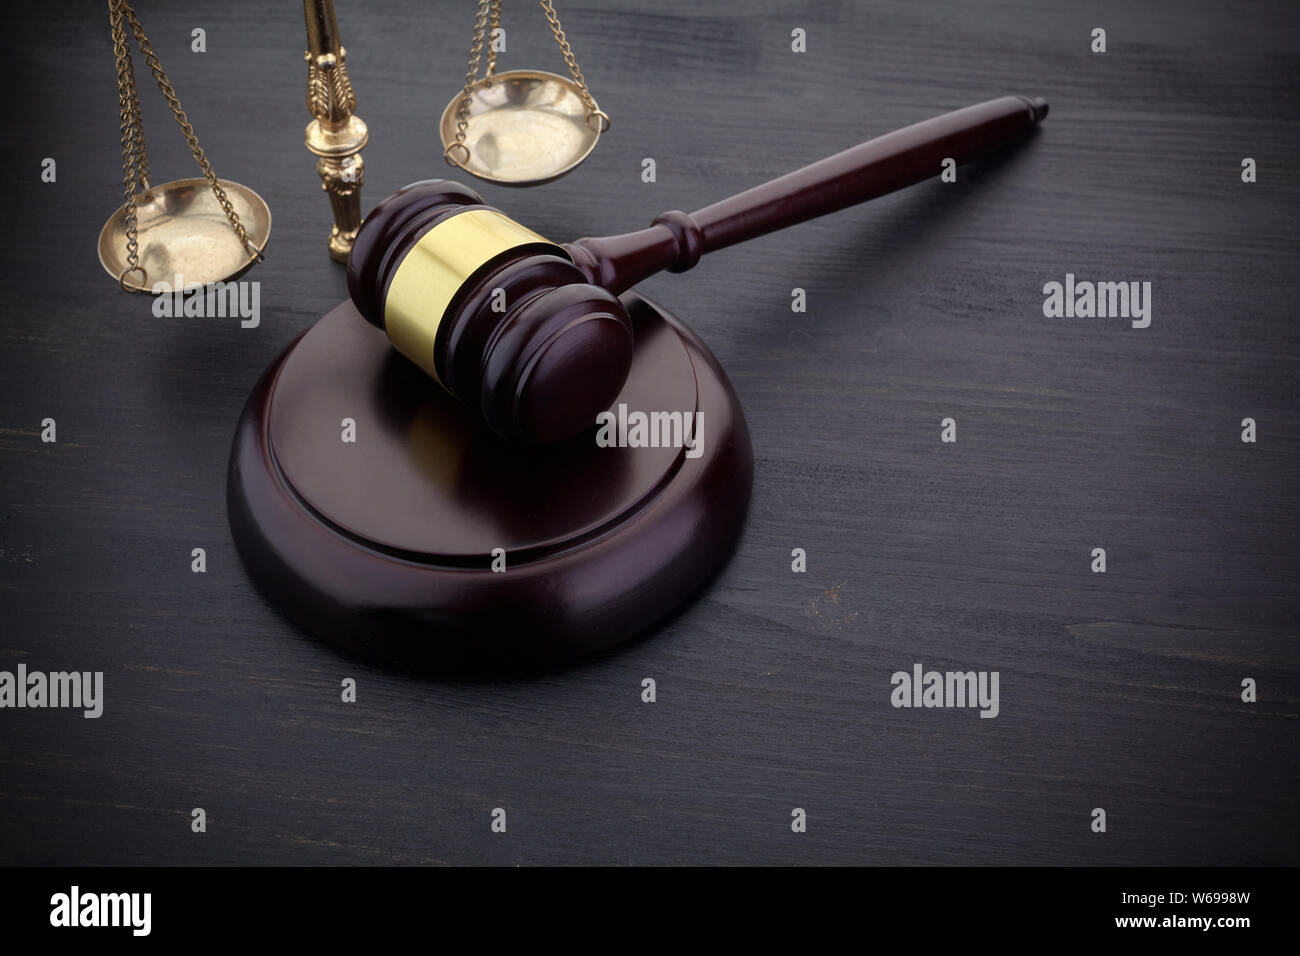 Judges Gavel And Scale Of Justice On The Black Table Background. Law Concept. Stock Photo